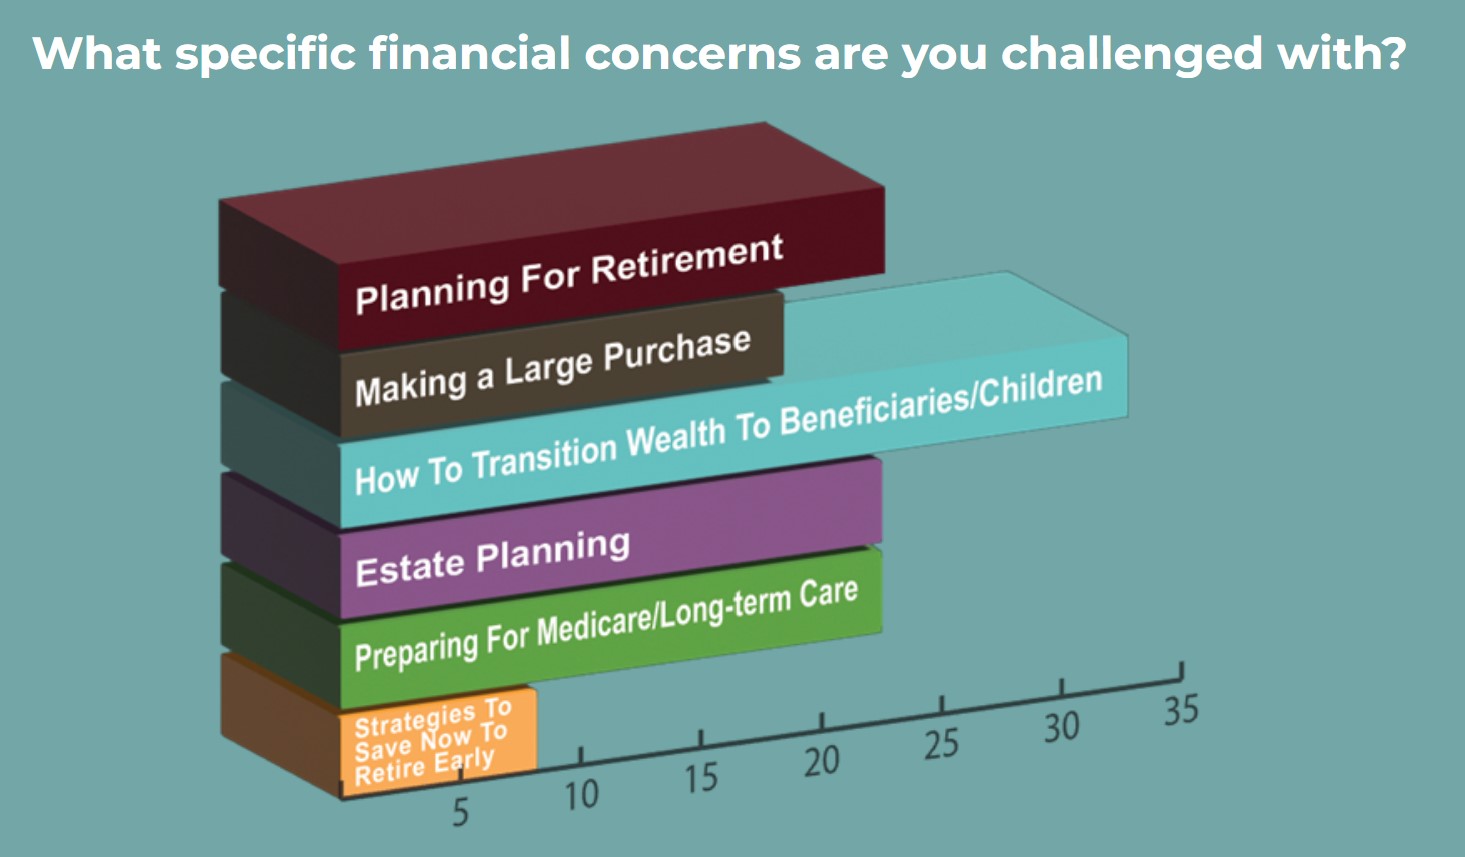 Specific Financial Concerns that Challenge Consumers